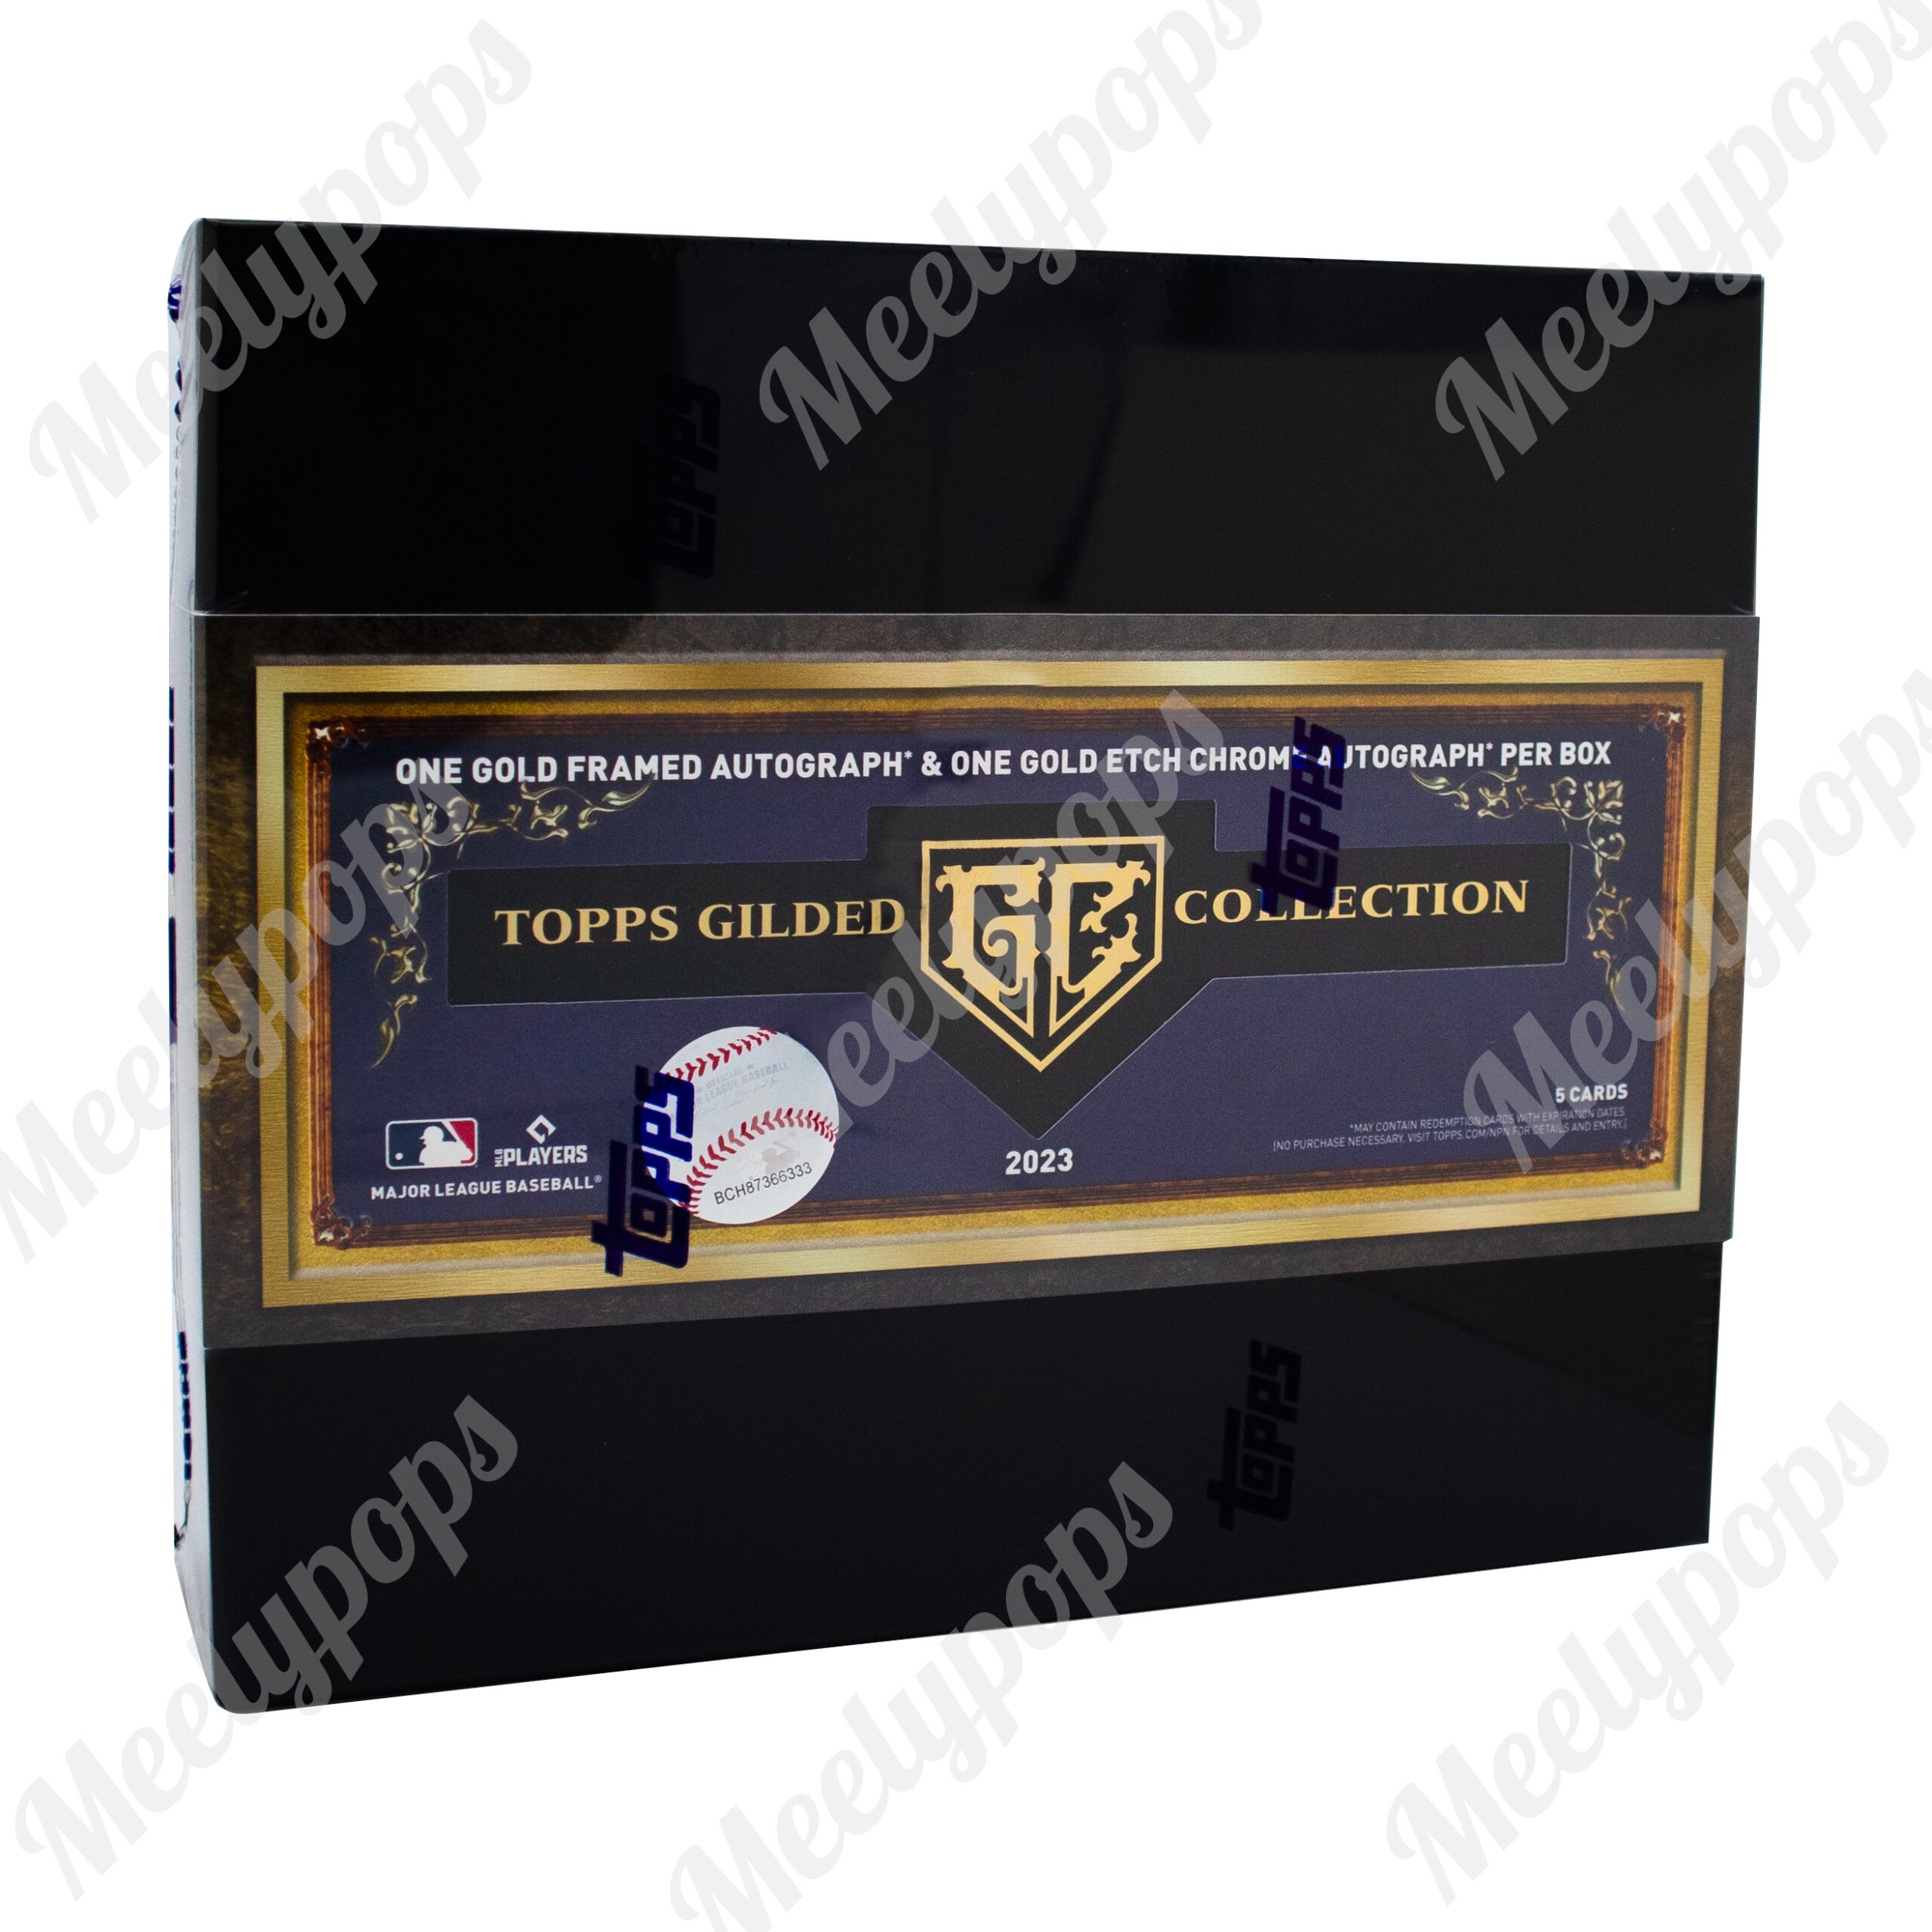 2023 Topps Gilded Collection Baseball Hobby Box – Meelypops Home Page